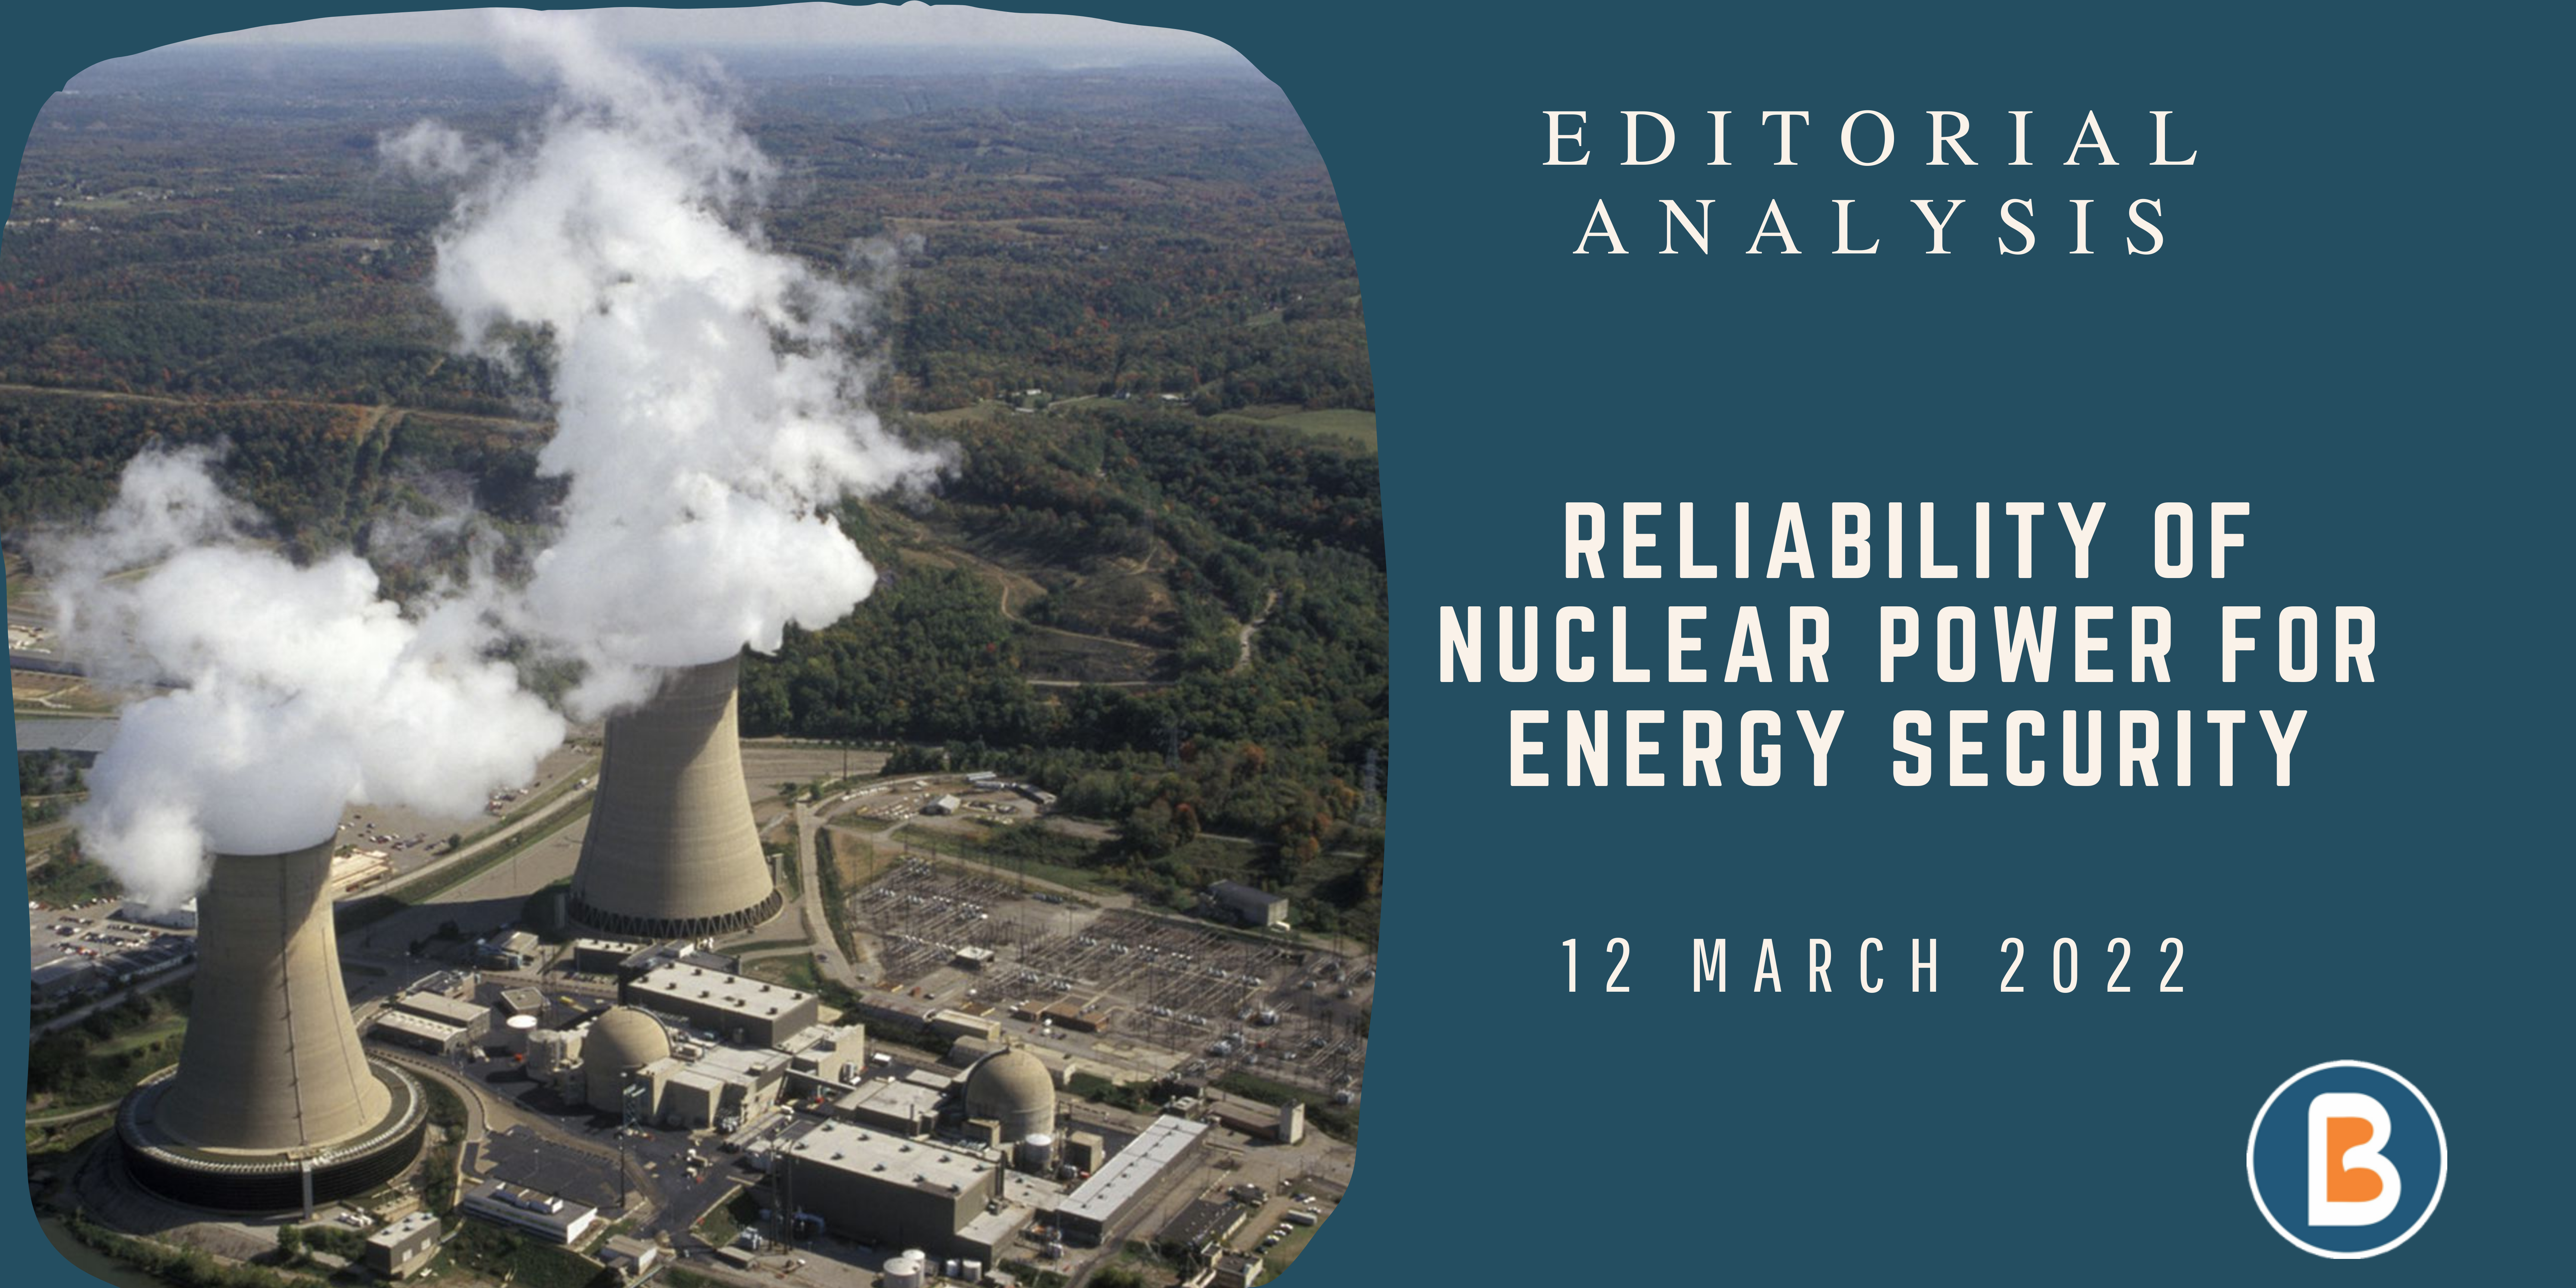 Editorial Analysis for IAS - Reliability of Nuclear Power for Energy Security